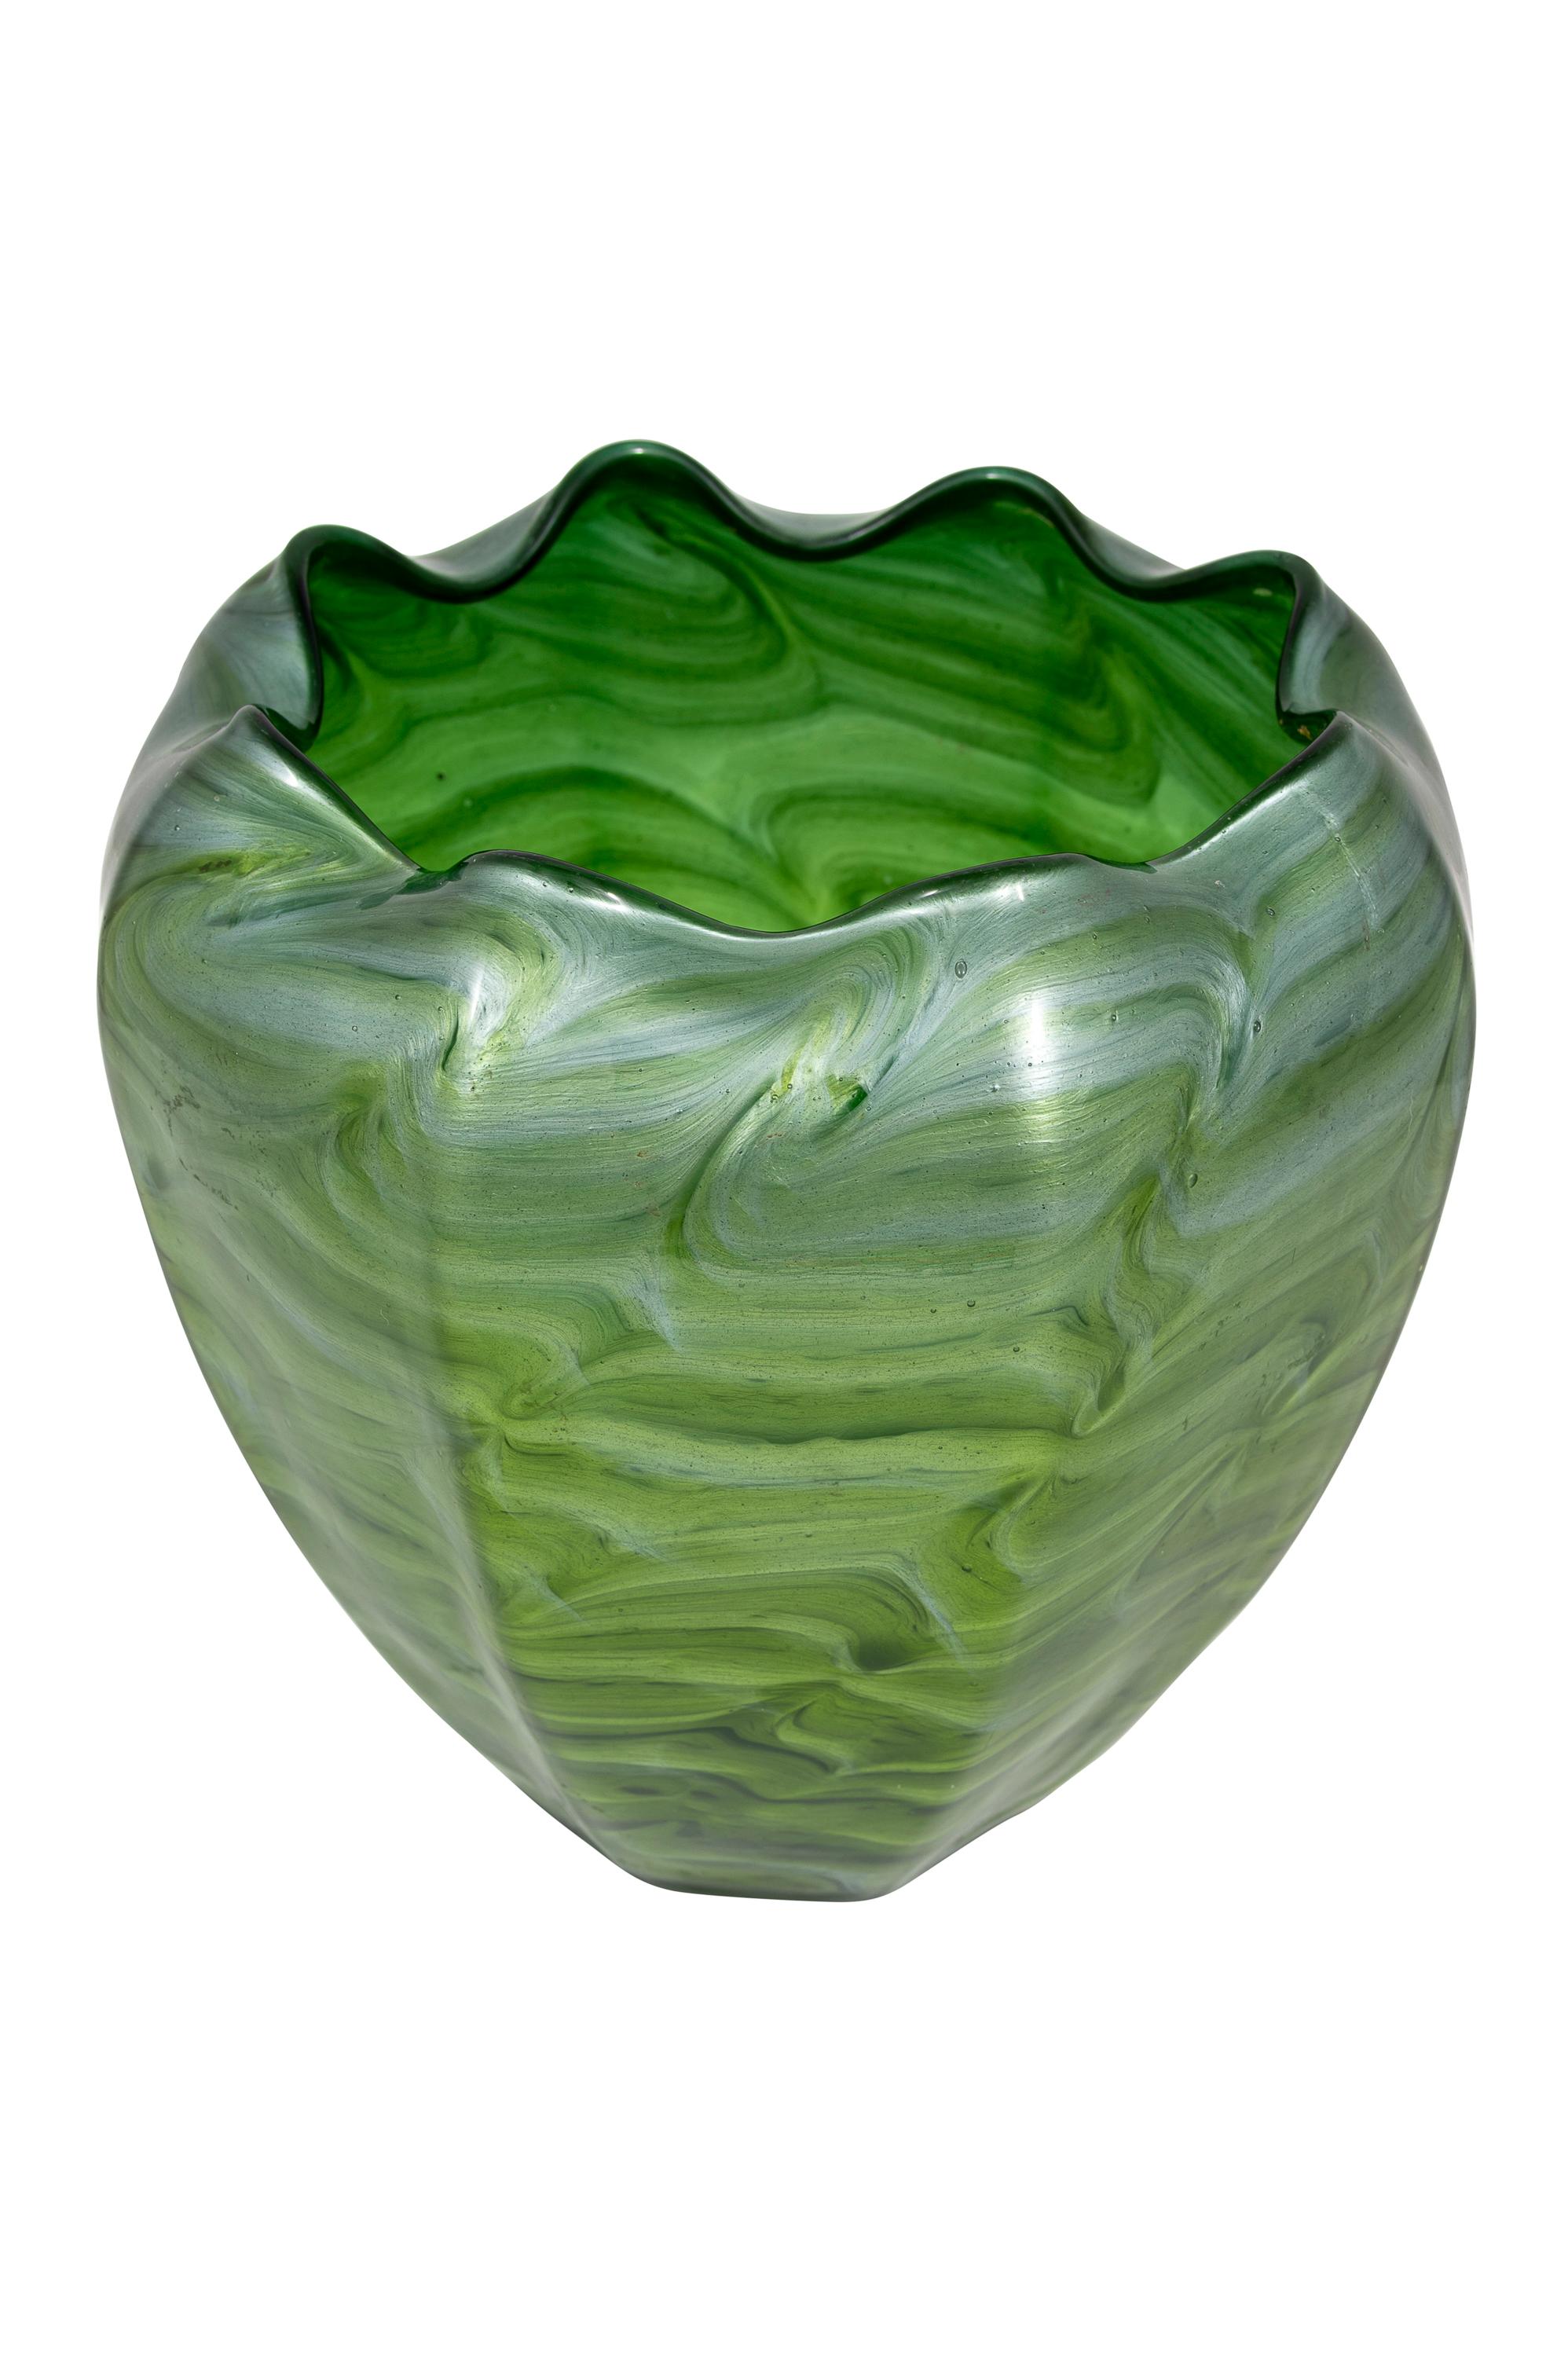 Green Bohemian Glass Vase Loetz circa 1905  In Good Condition For Sale In Klosterneuburg, AT